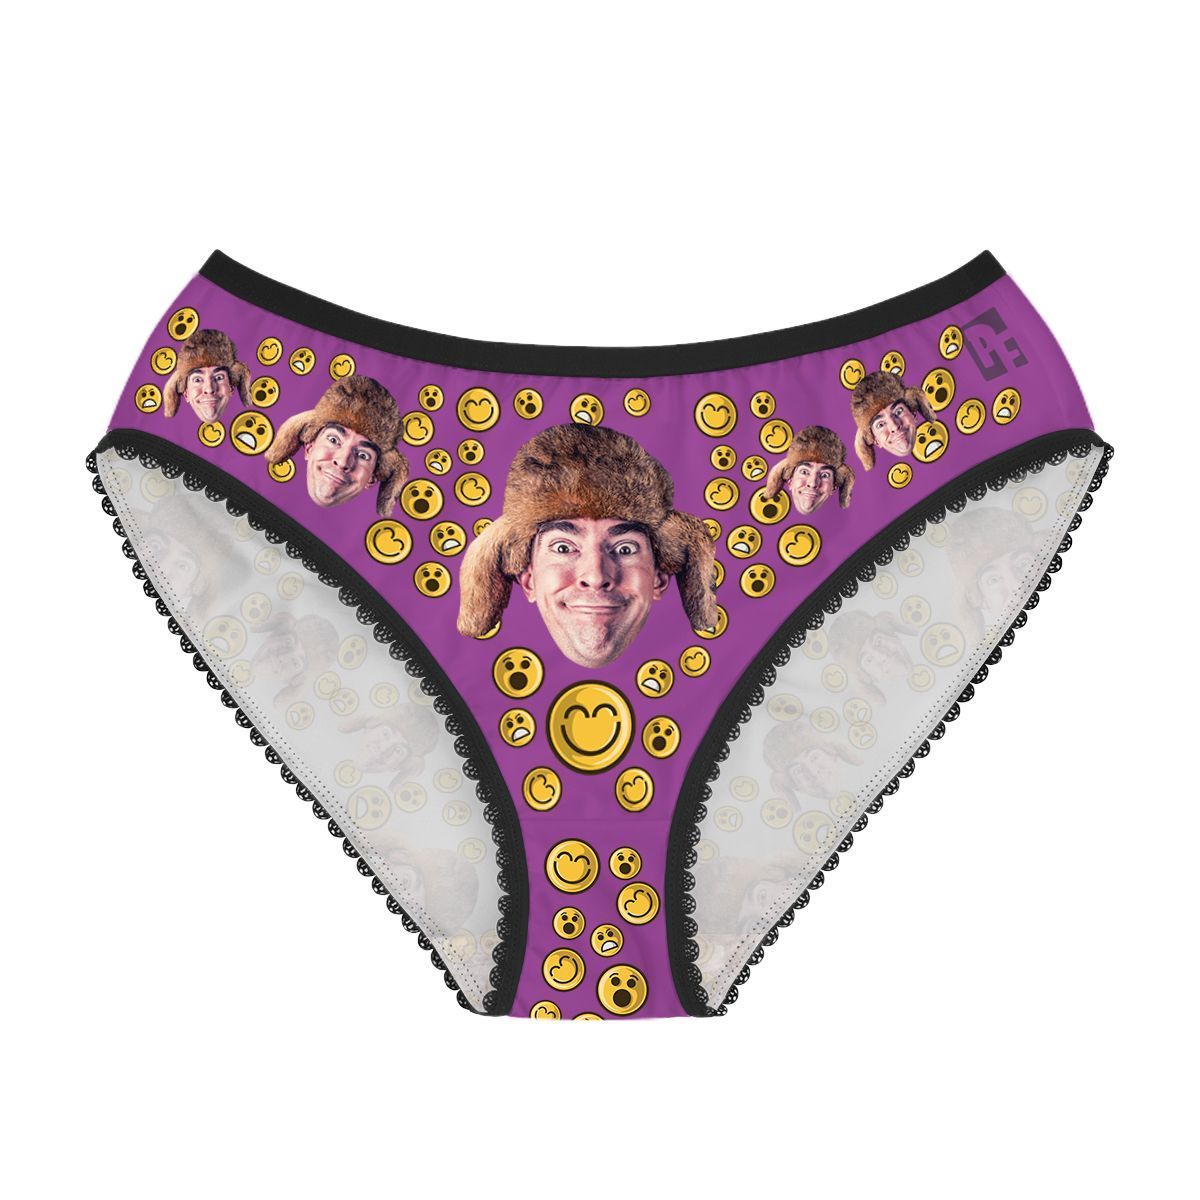 Purple Smiles women's underwear briefs personalized with photo printed on them